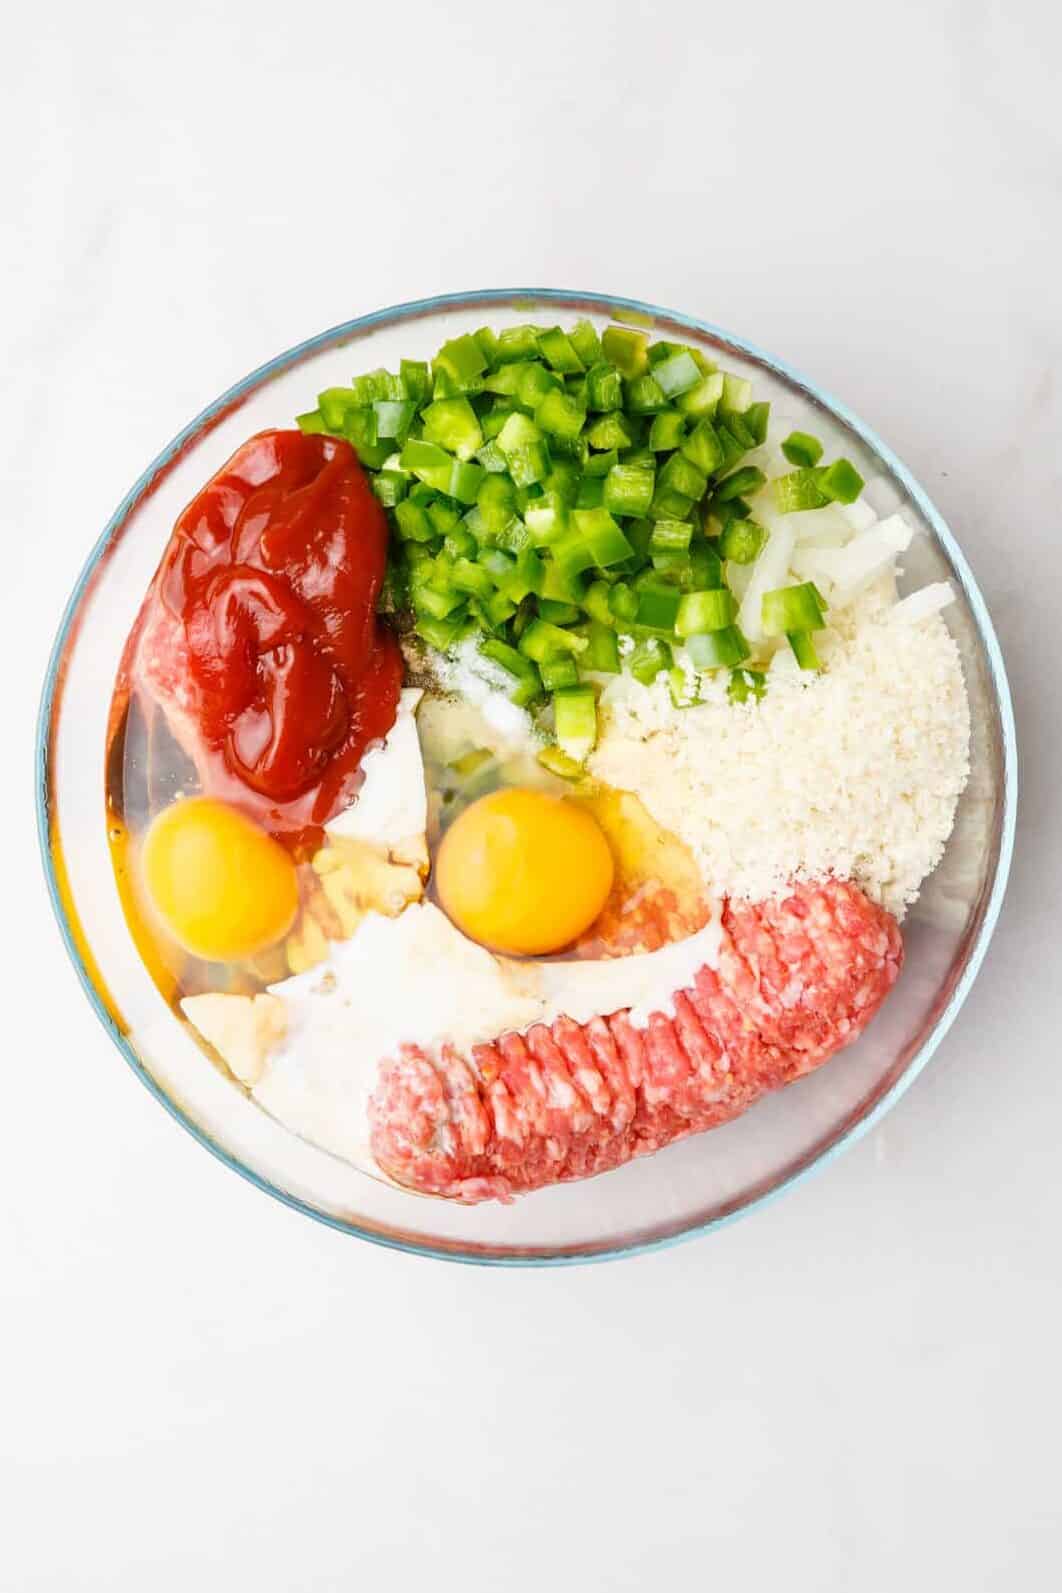 step 1 to make southern meatloaf, combine all the ingredients in a large glass bowl